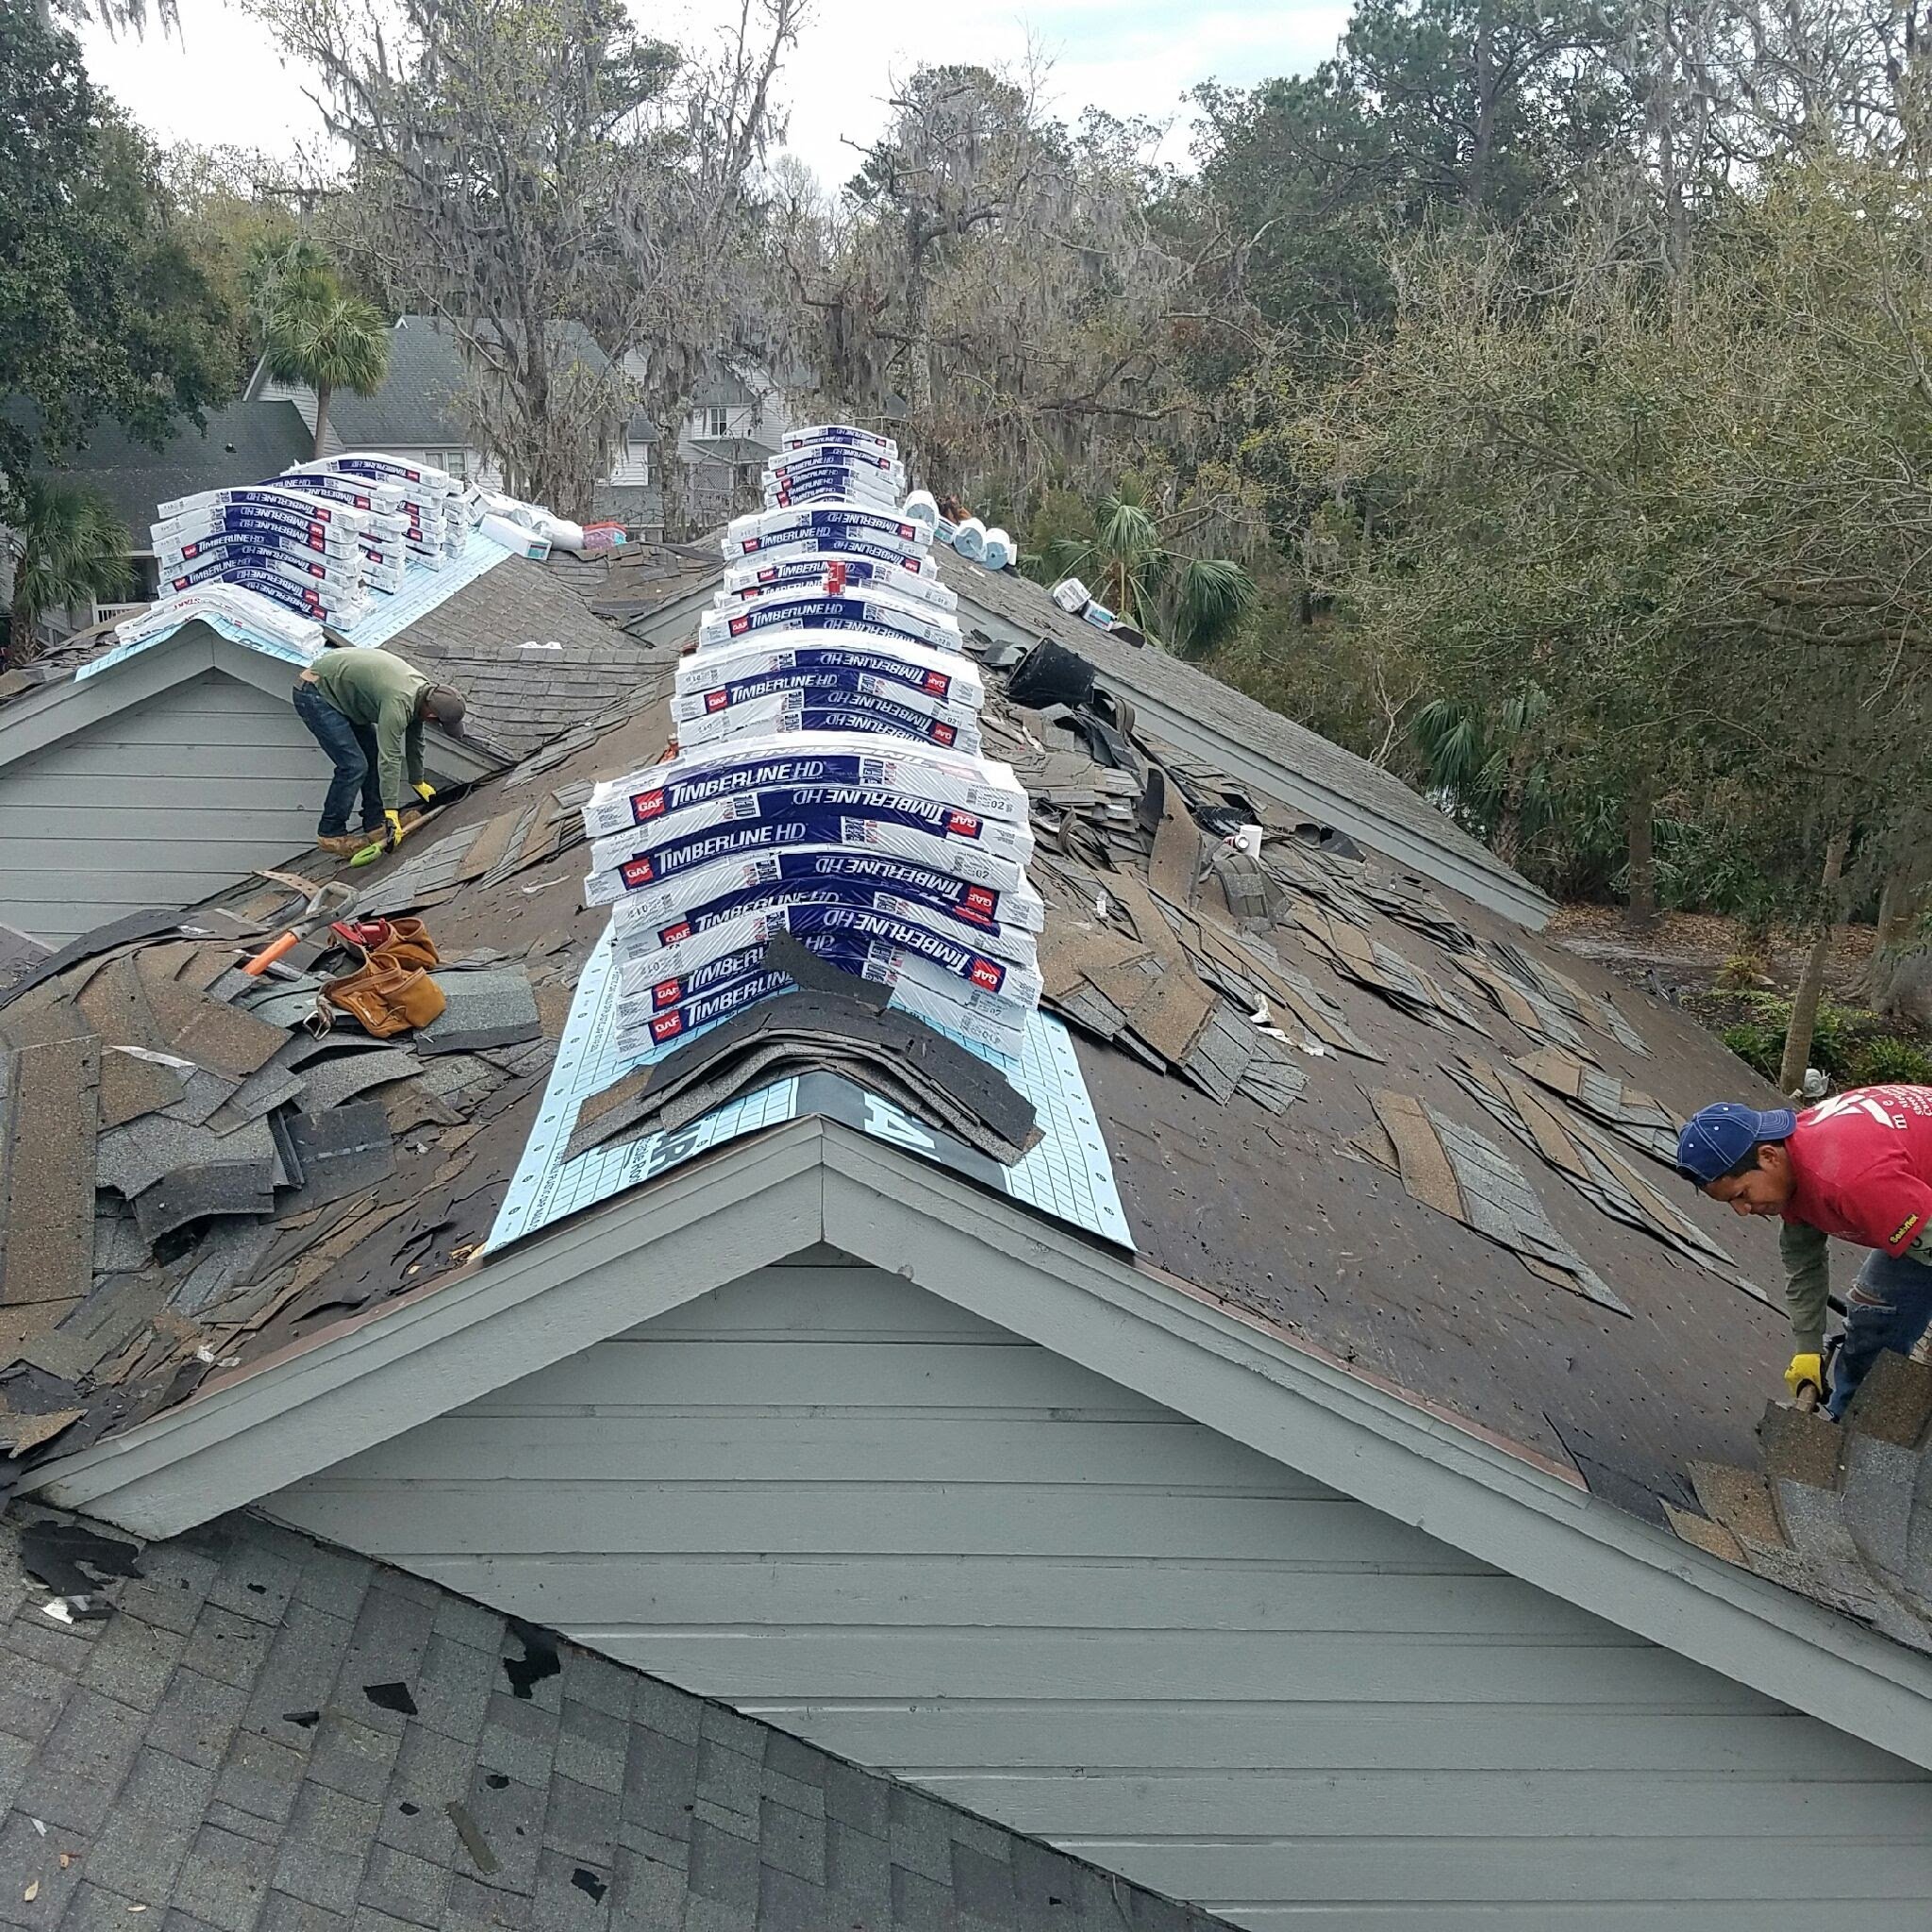 RoofCrafters performing a roof replacement